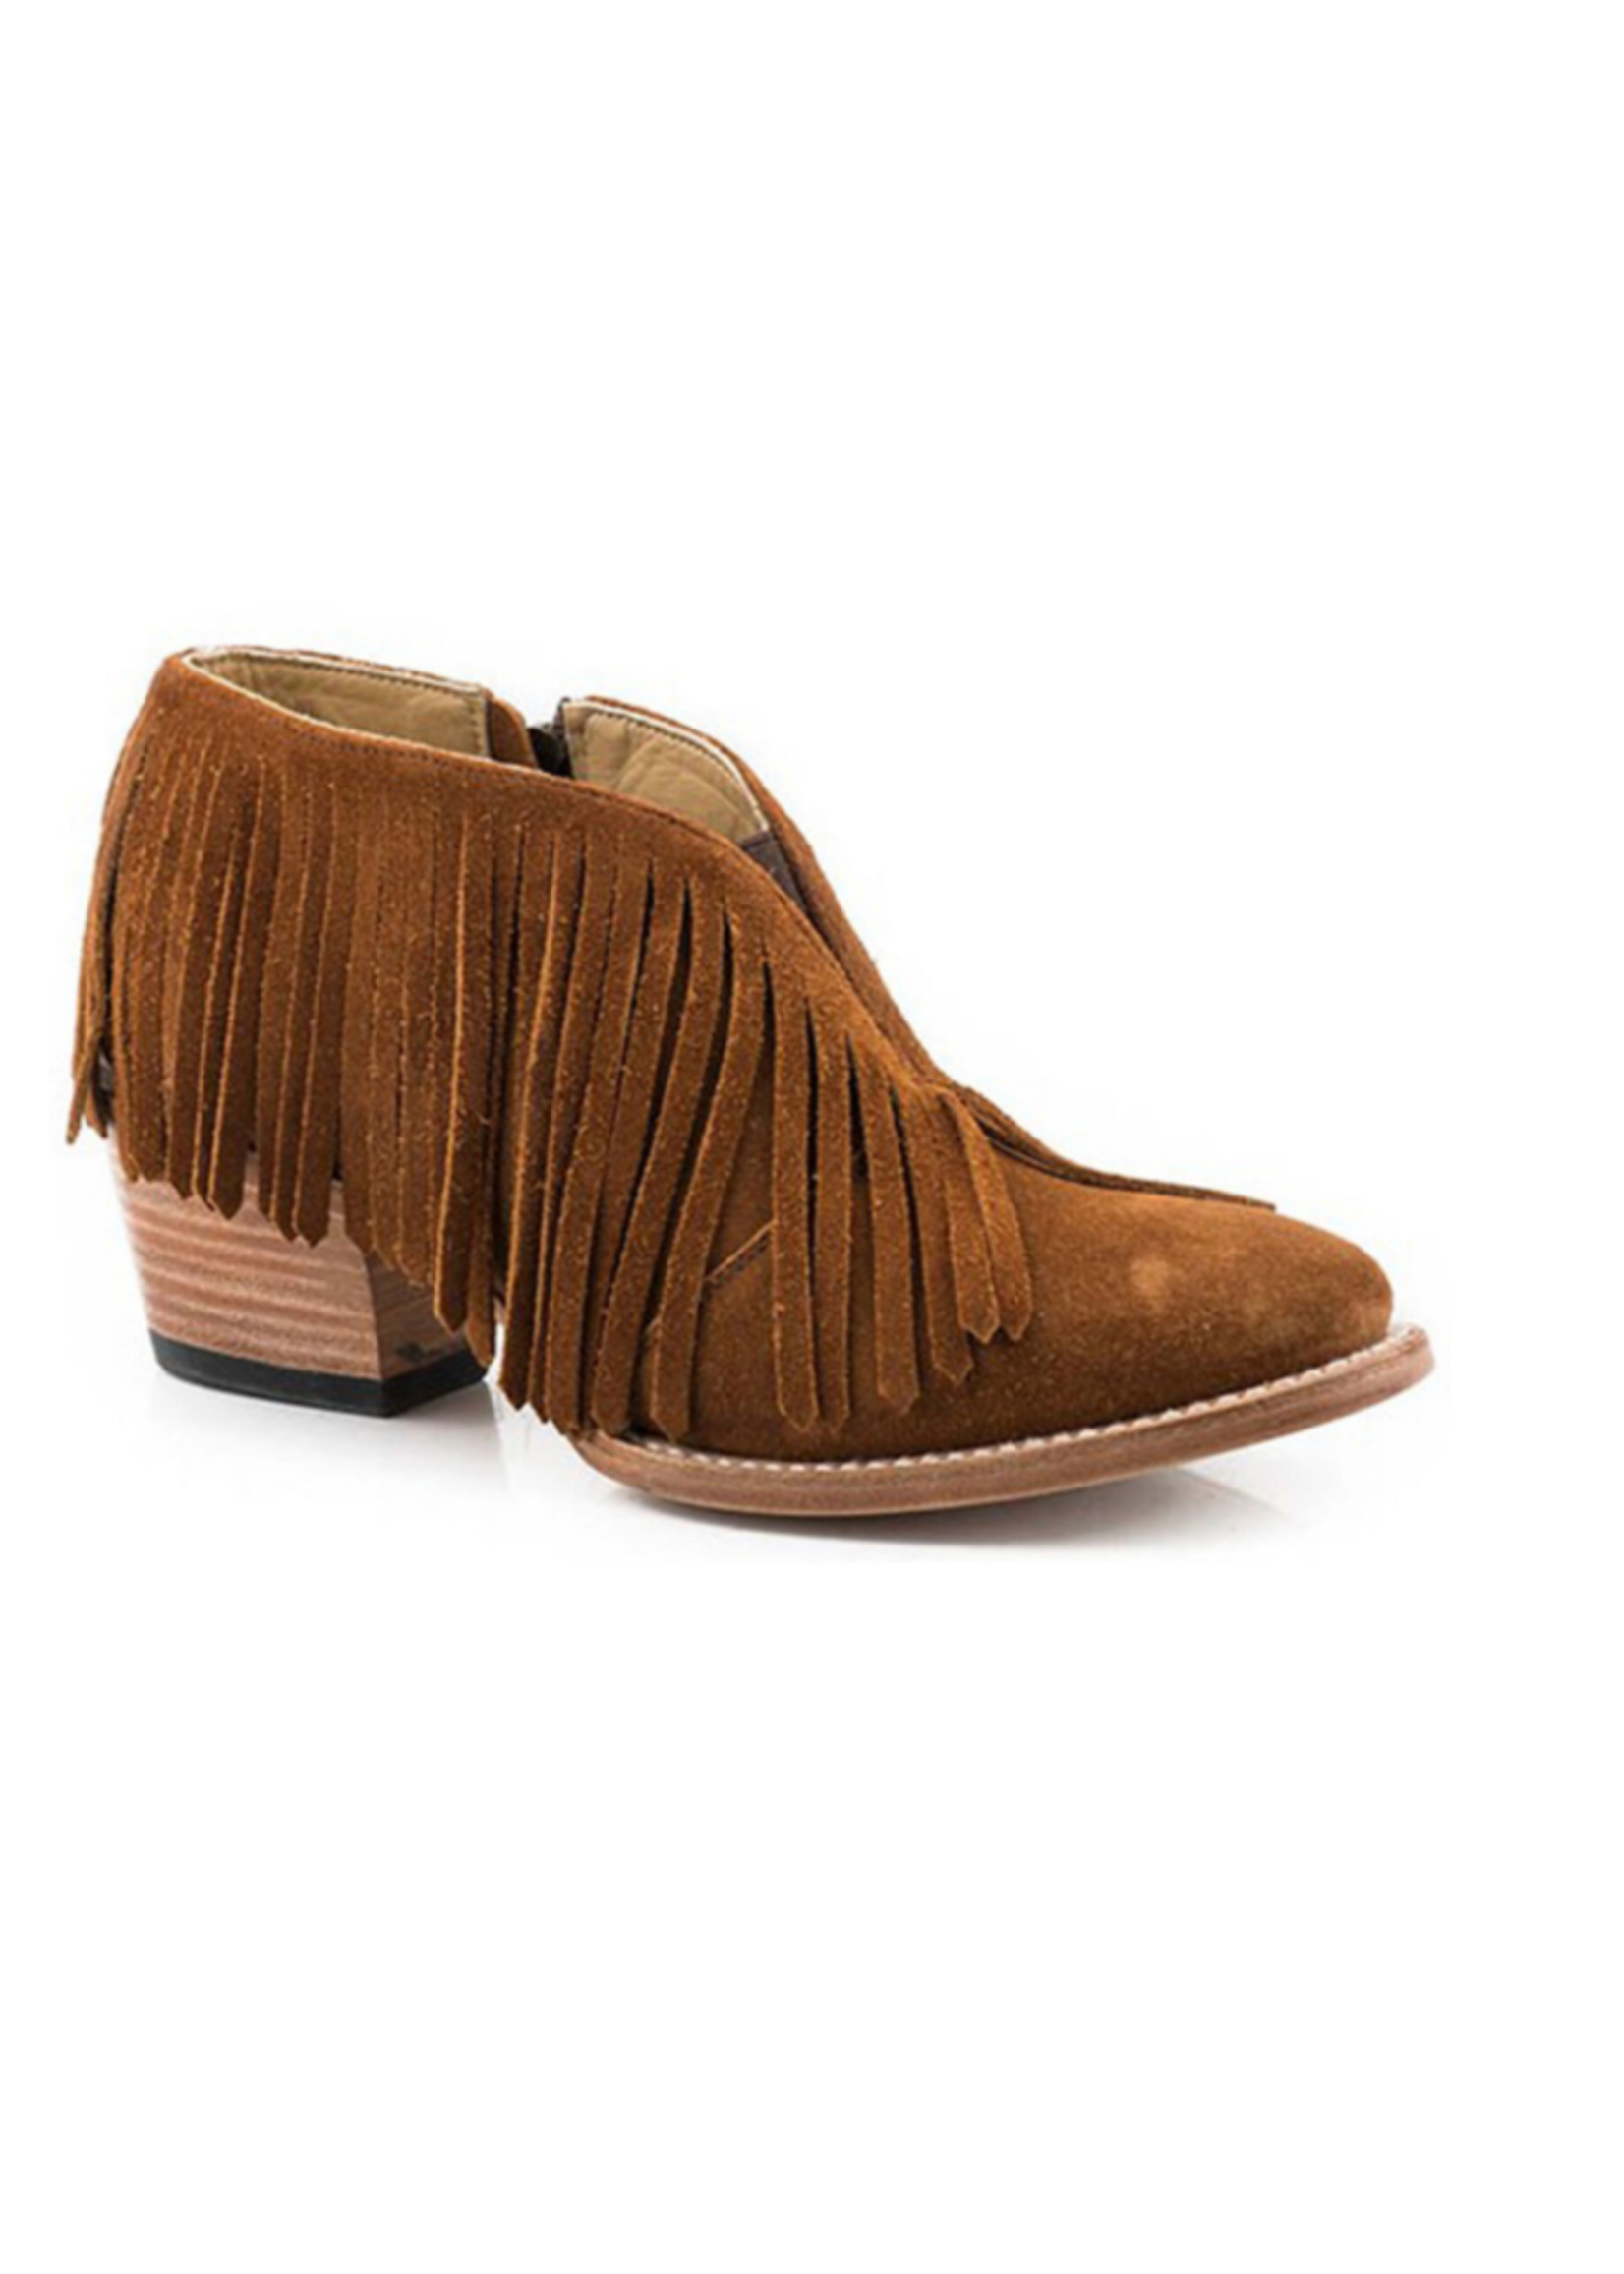 Stetson Lds Stetson Brown Fringe Suede Shorty Boot